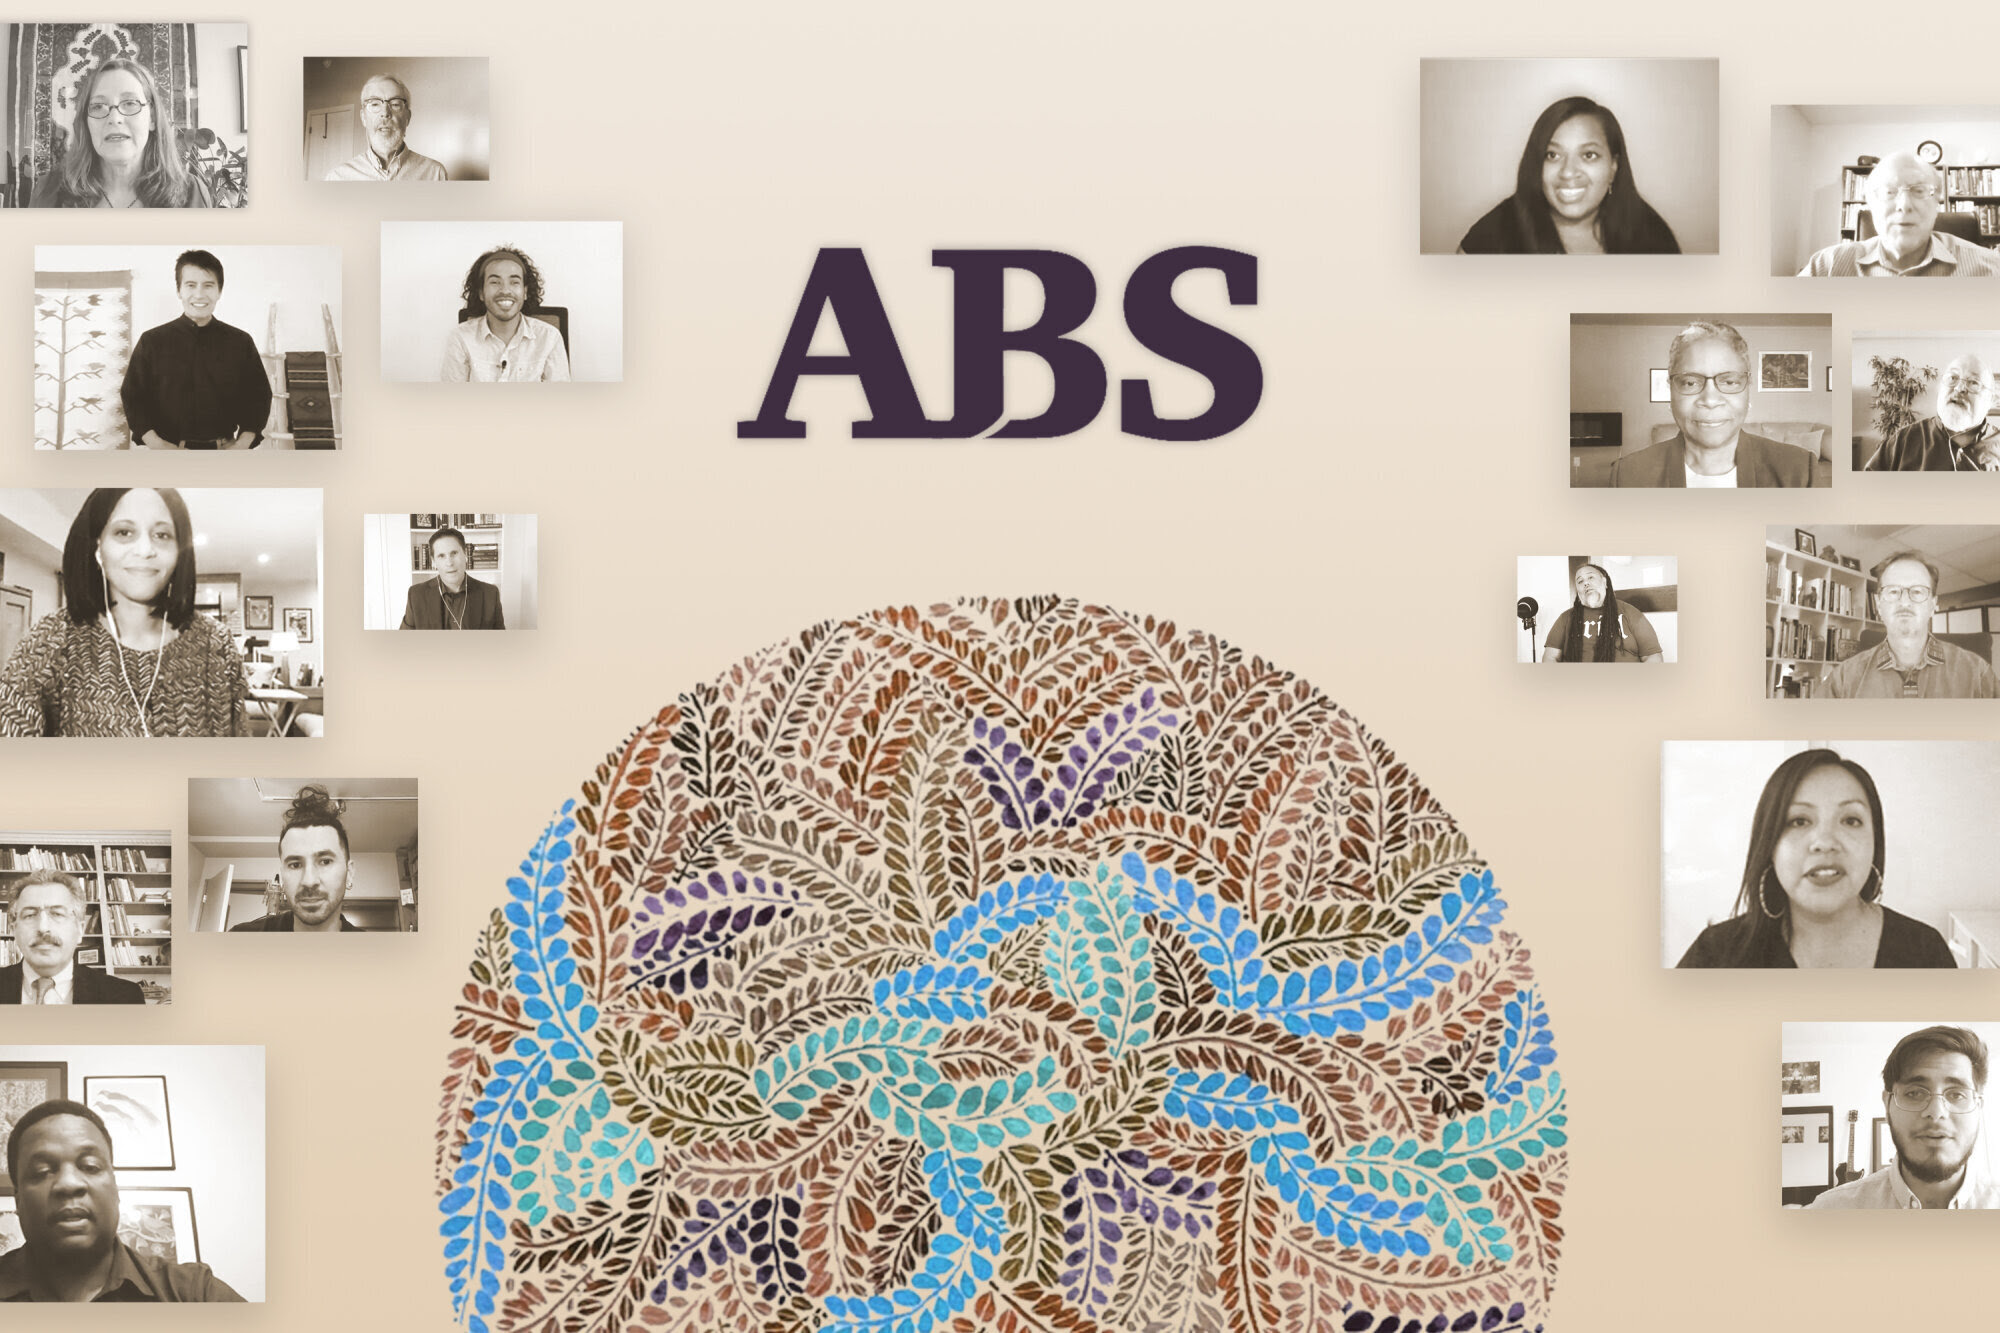 Illustration showing the letters ABS above a circular multi-color pattern of fern leaves, all surrounded by monochrome video-call frames of diverse conference participants.